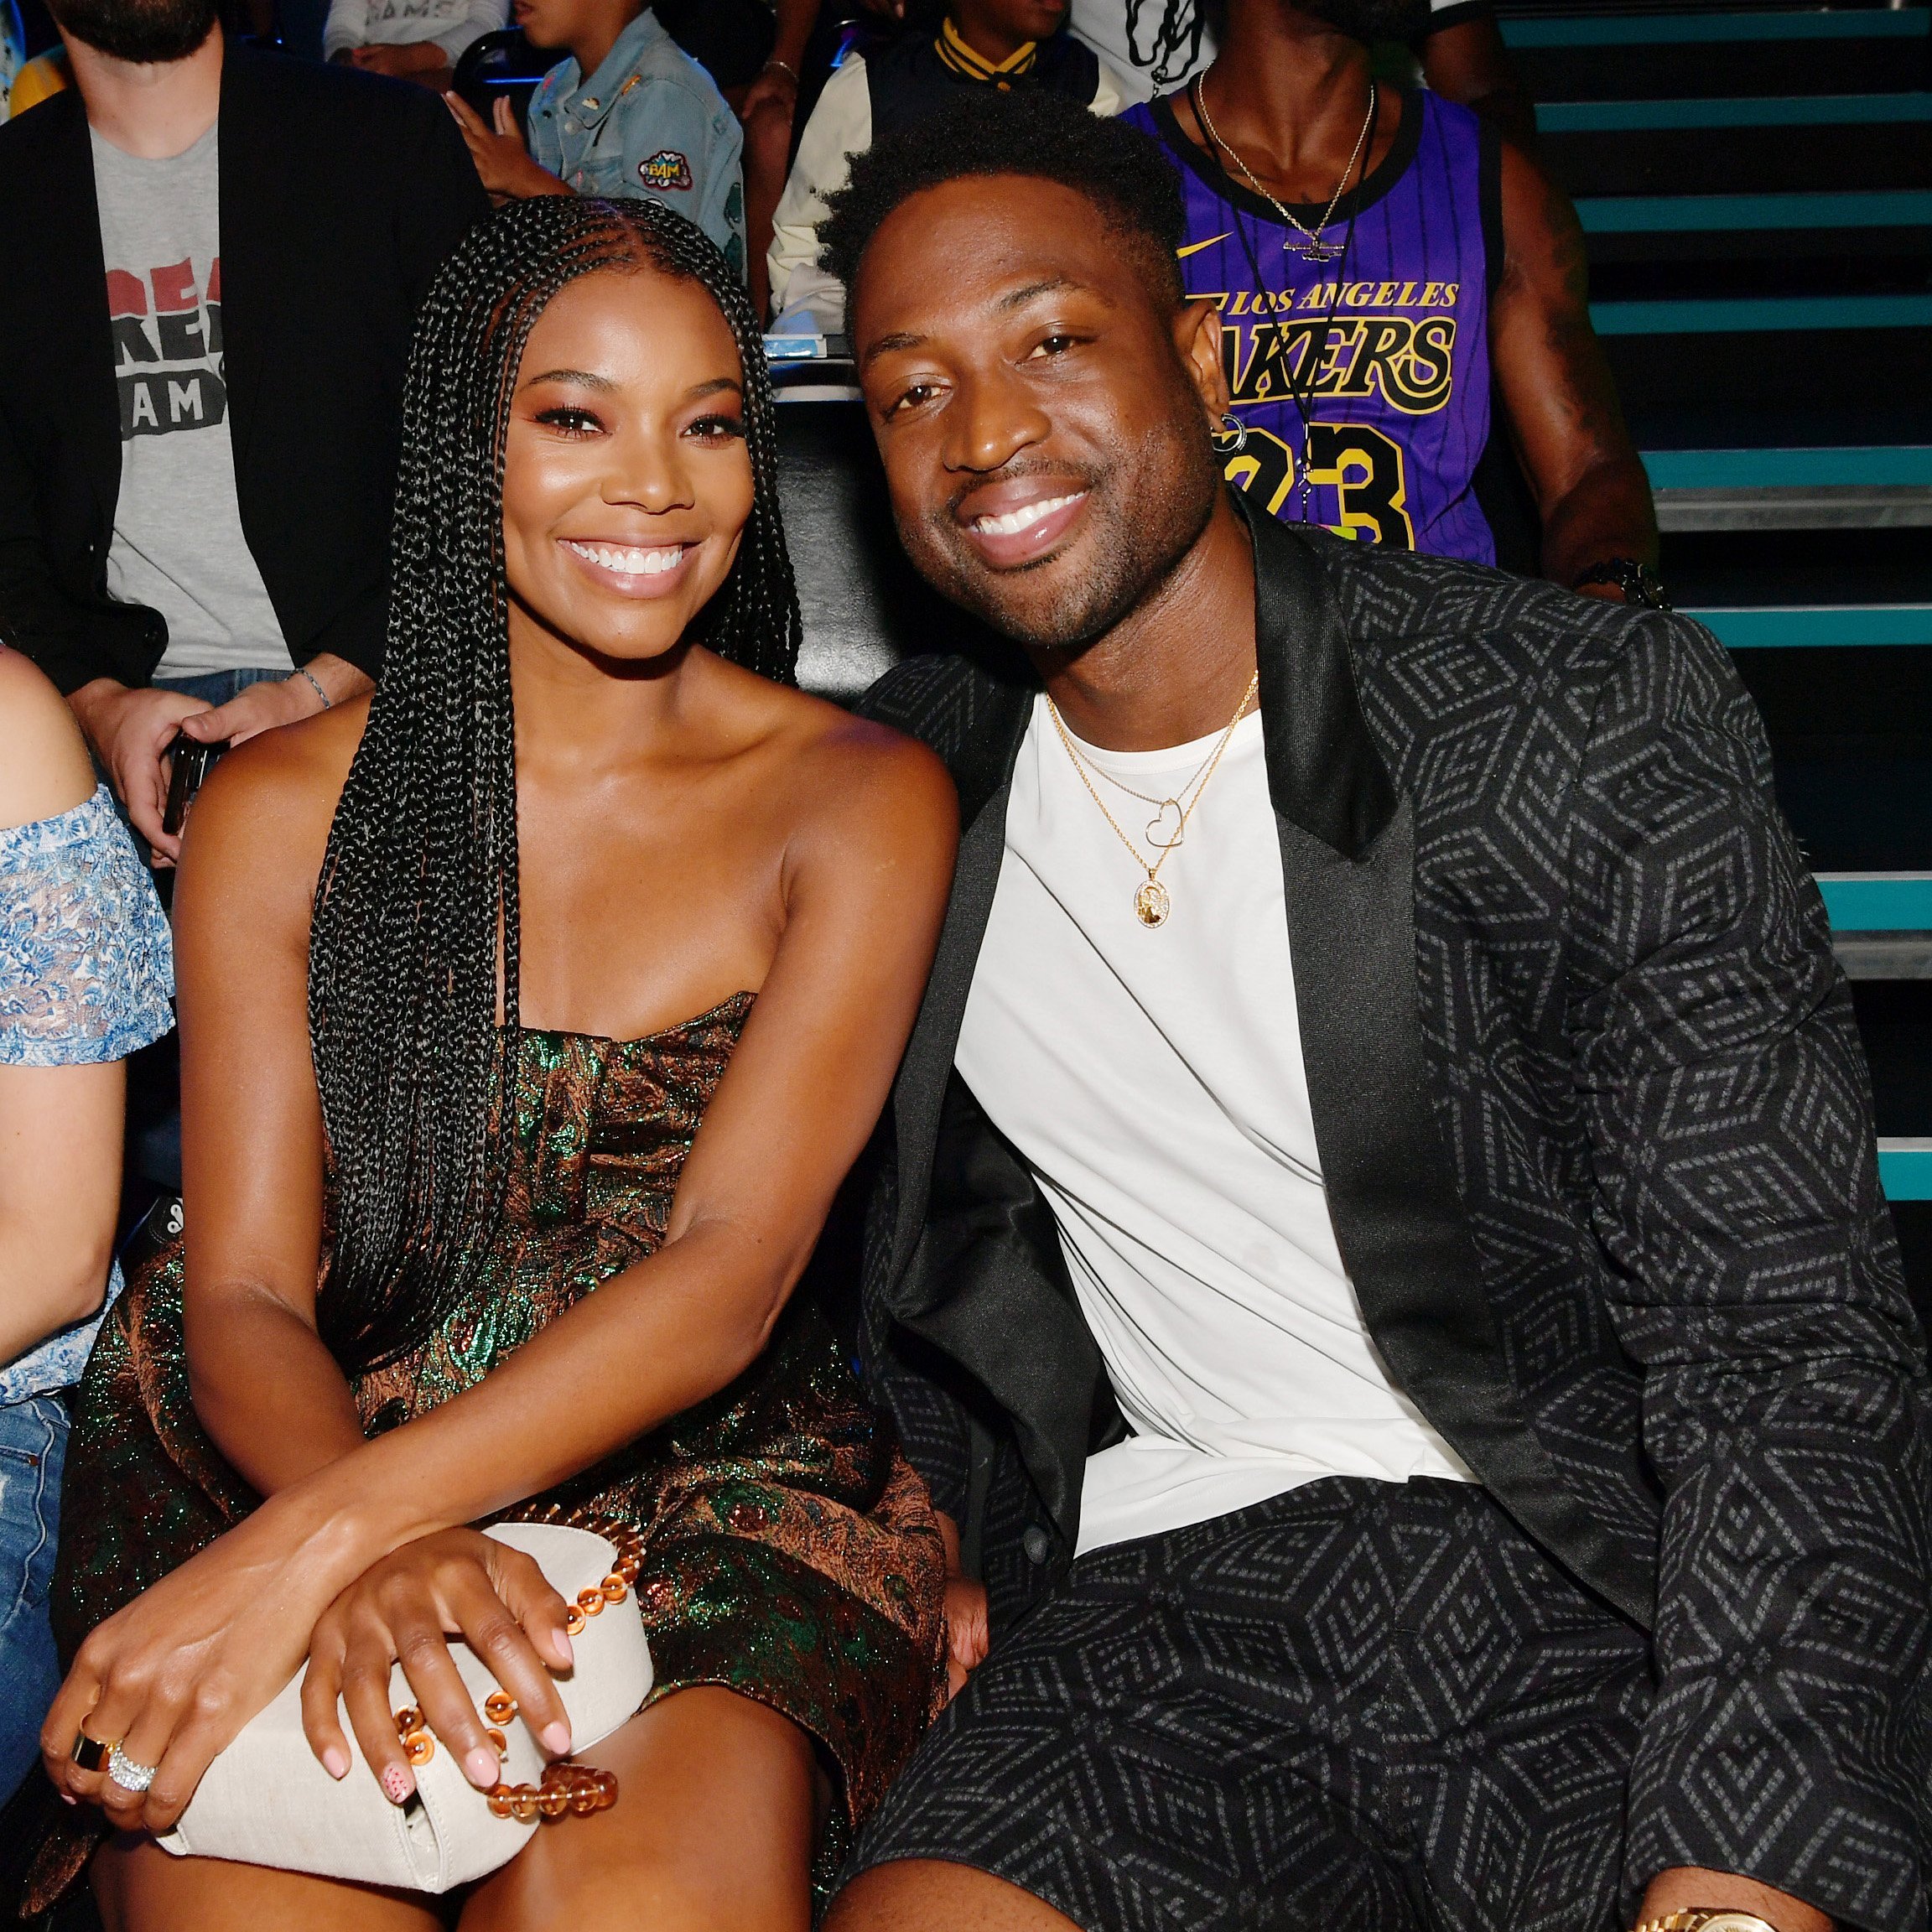 Gabrielle Union and Dwayne Wade attend Nickelodeon Kids' Choice Sports 2019 in Santa Monica, California on July 11, 2019 | Photo: Getty Images